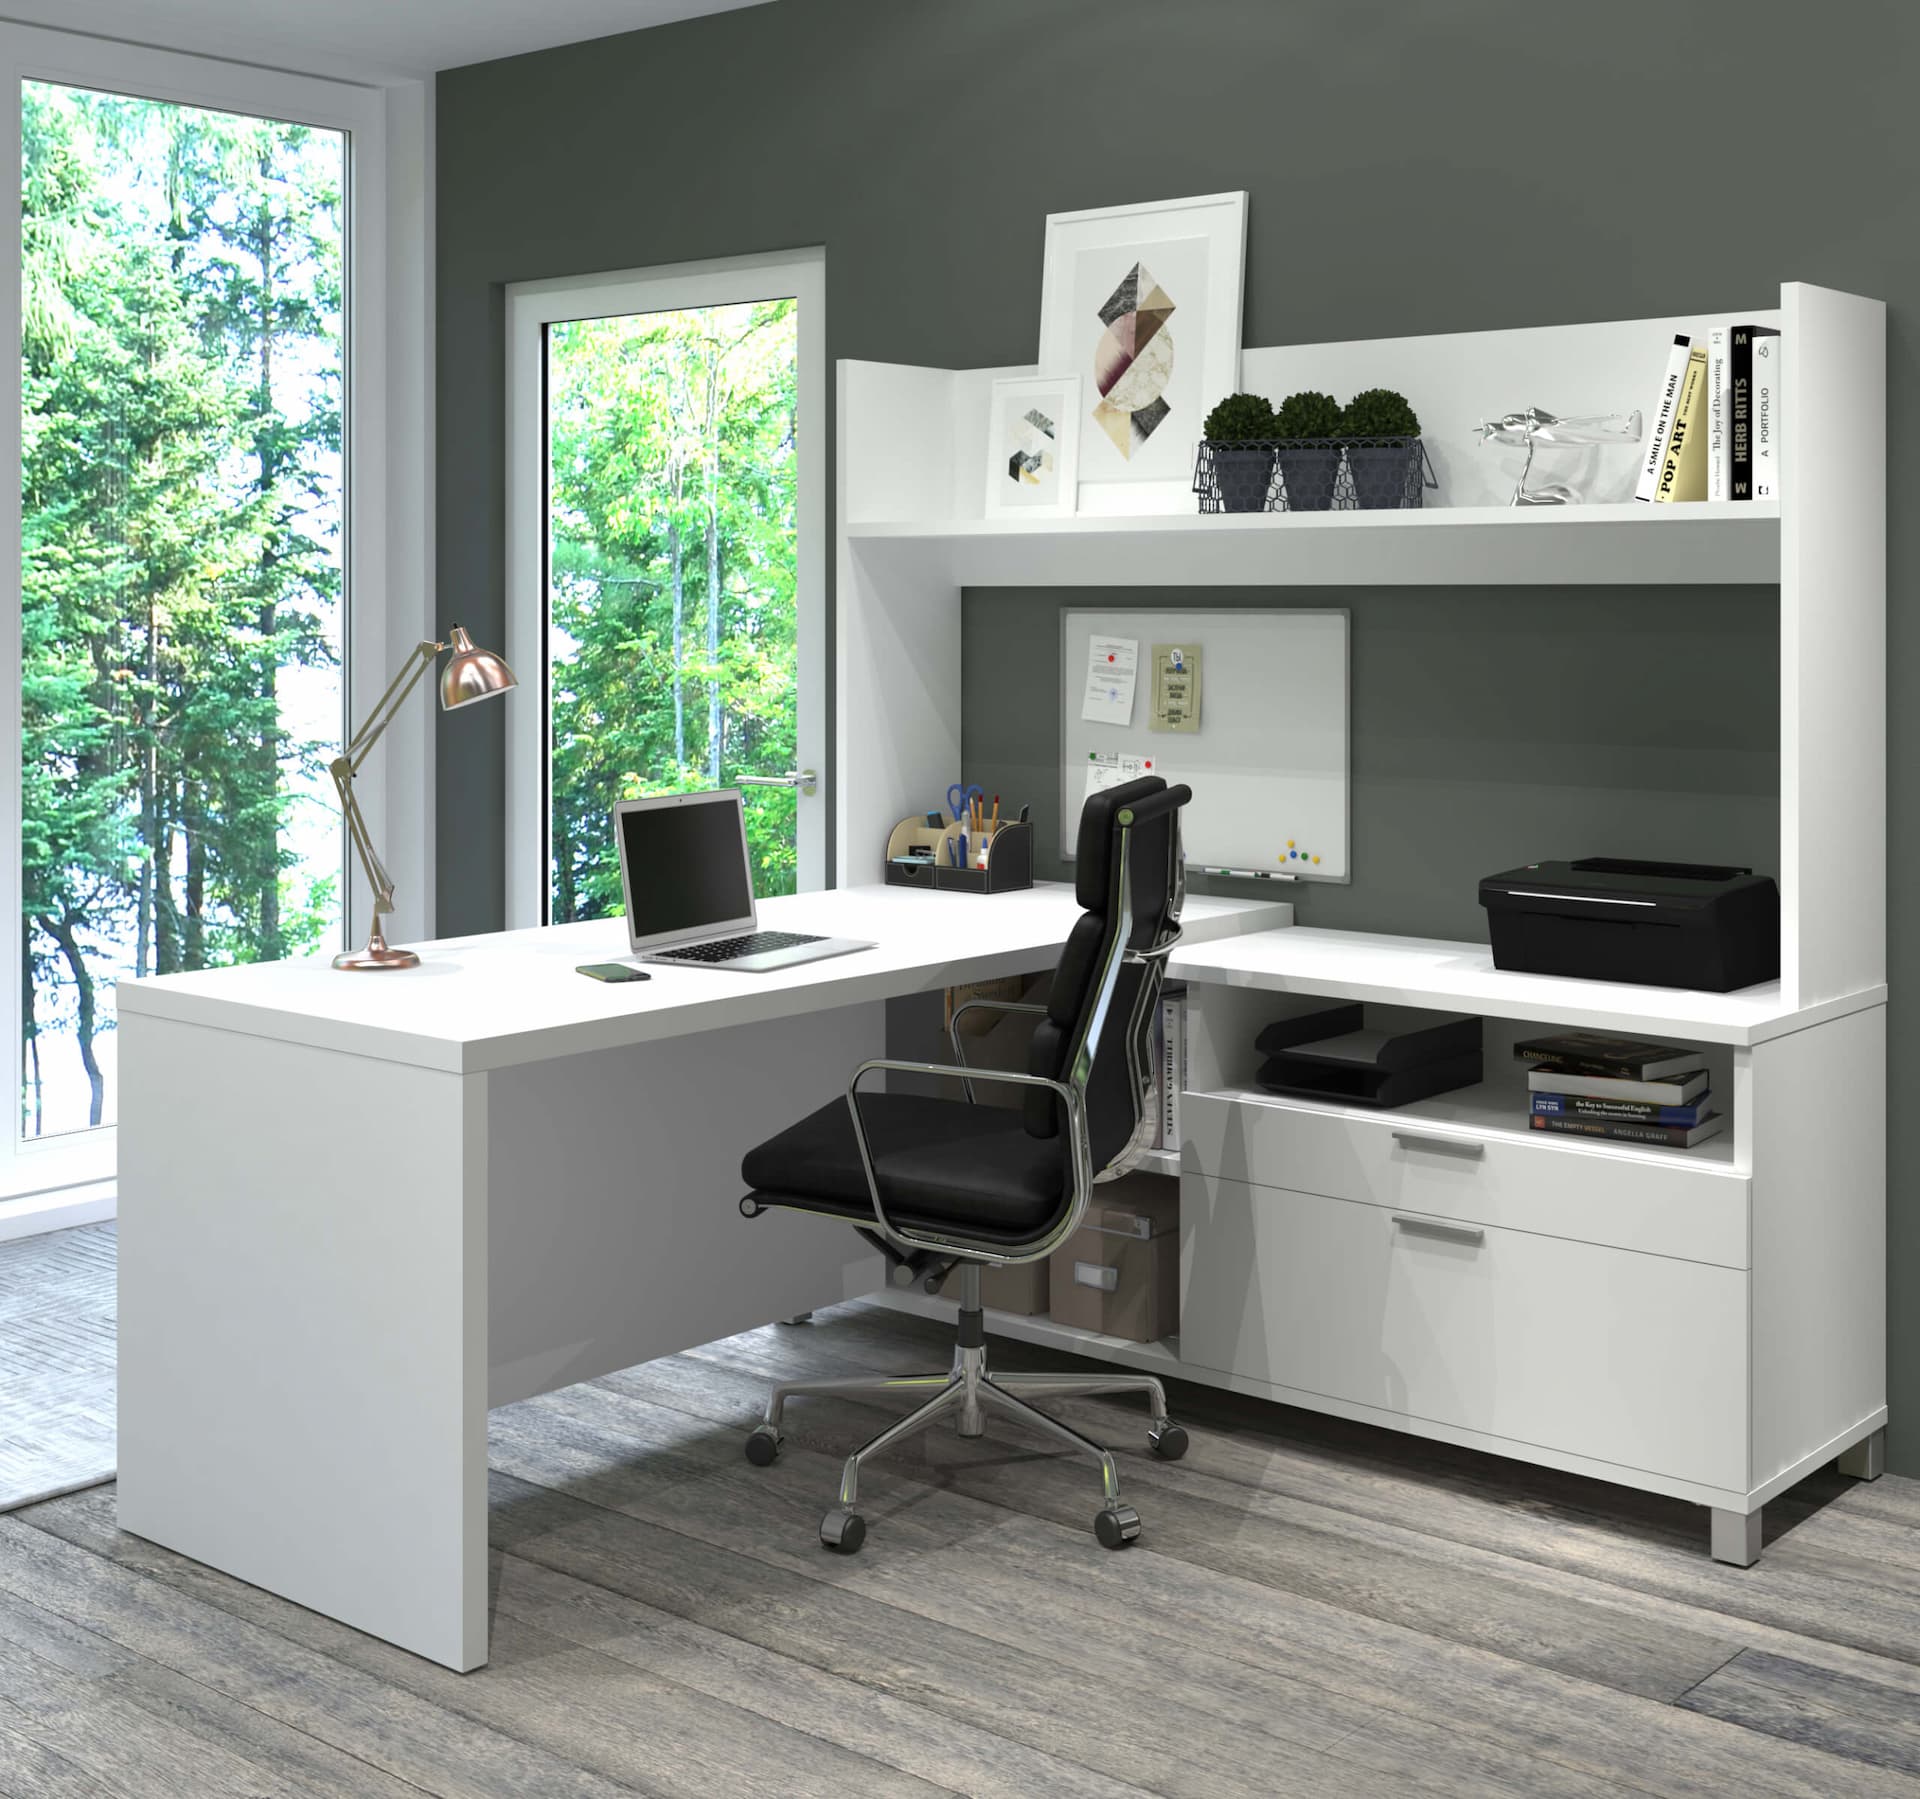 Functional home office with budget-friendly office furniture